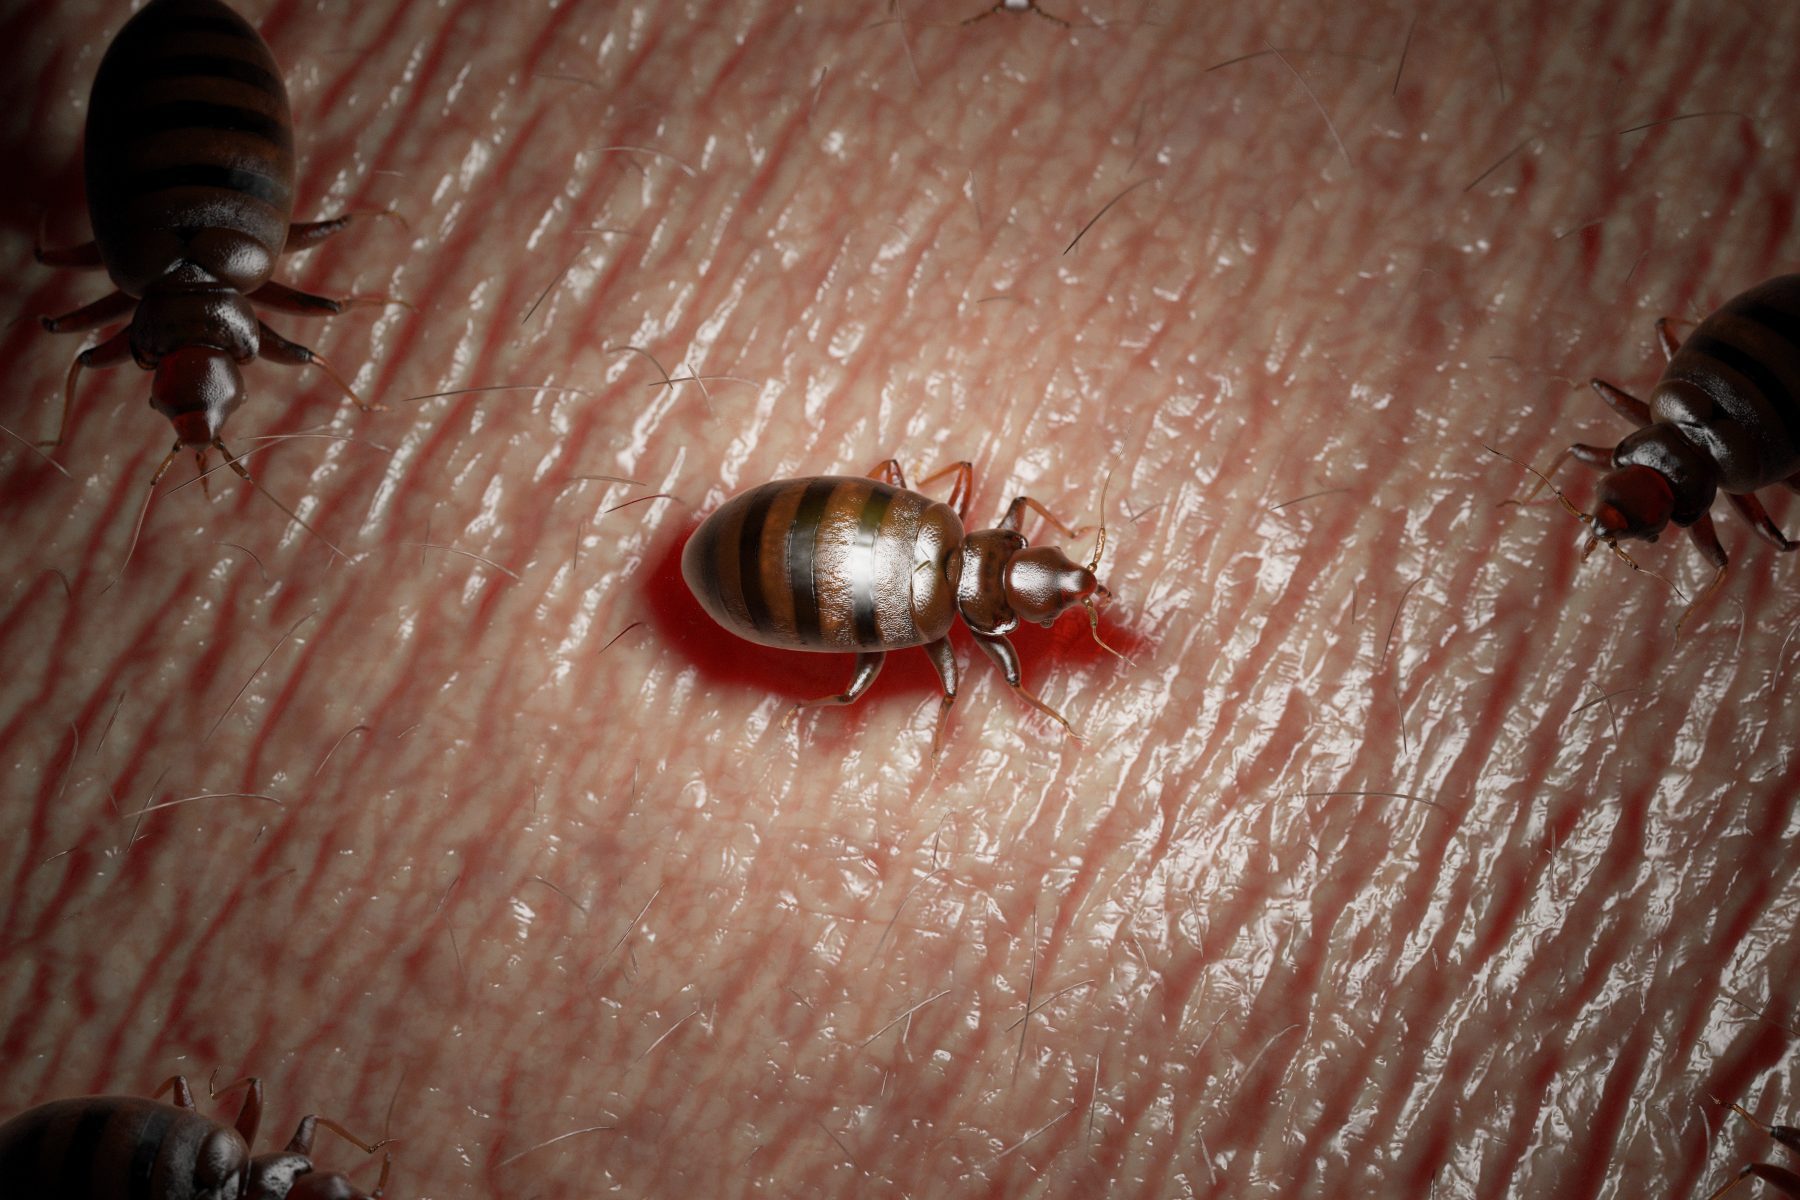 Computer generated bed bugs on skin